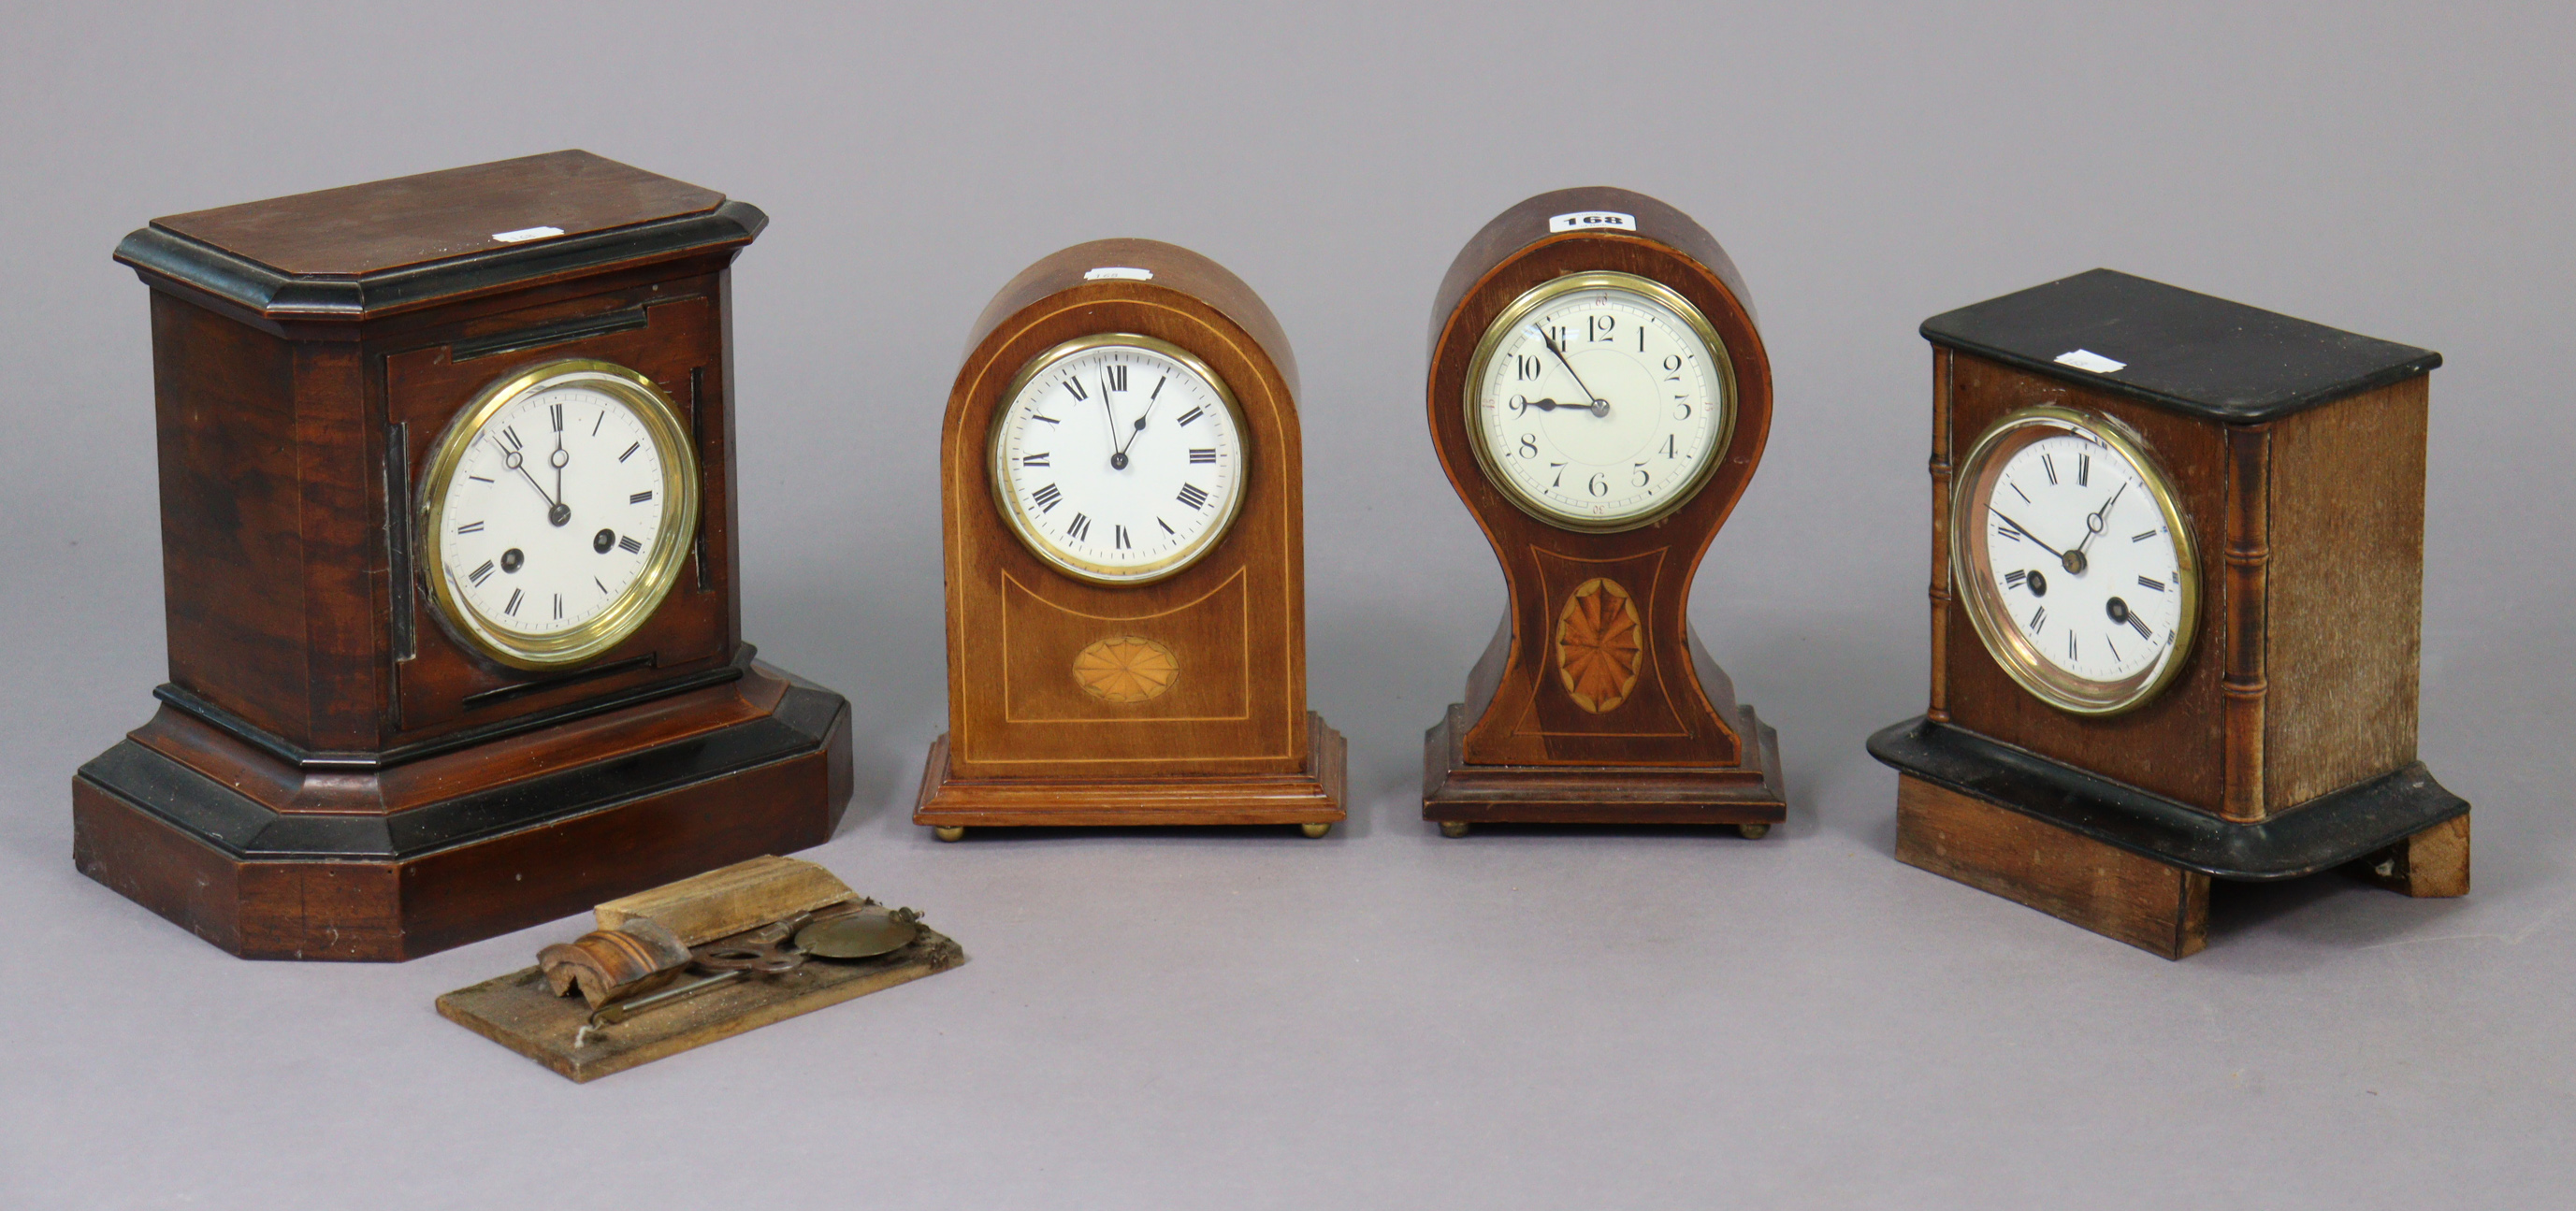 Two Edwardian mantel timepieces each in an inlaid-mahogany case; together with two Edwardian